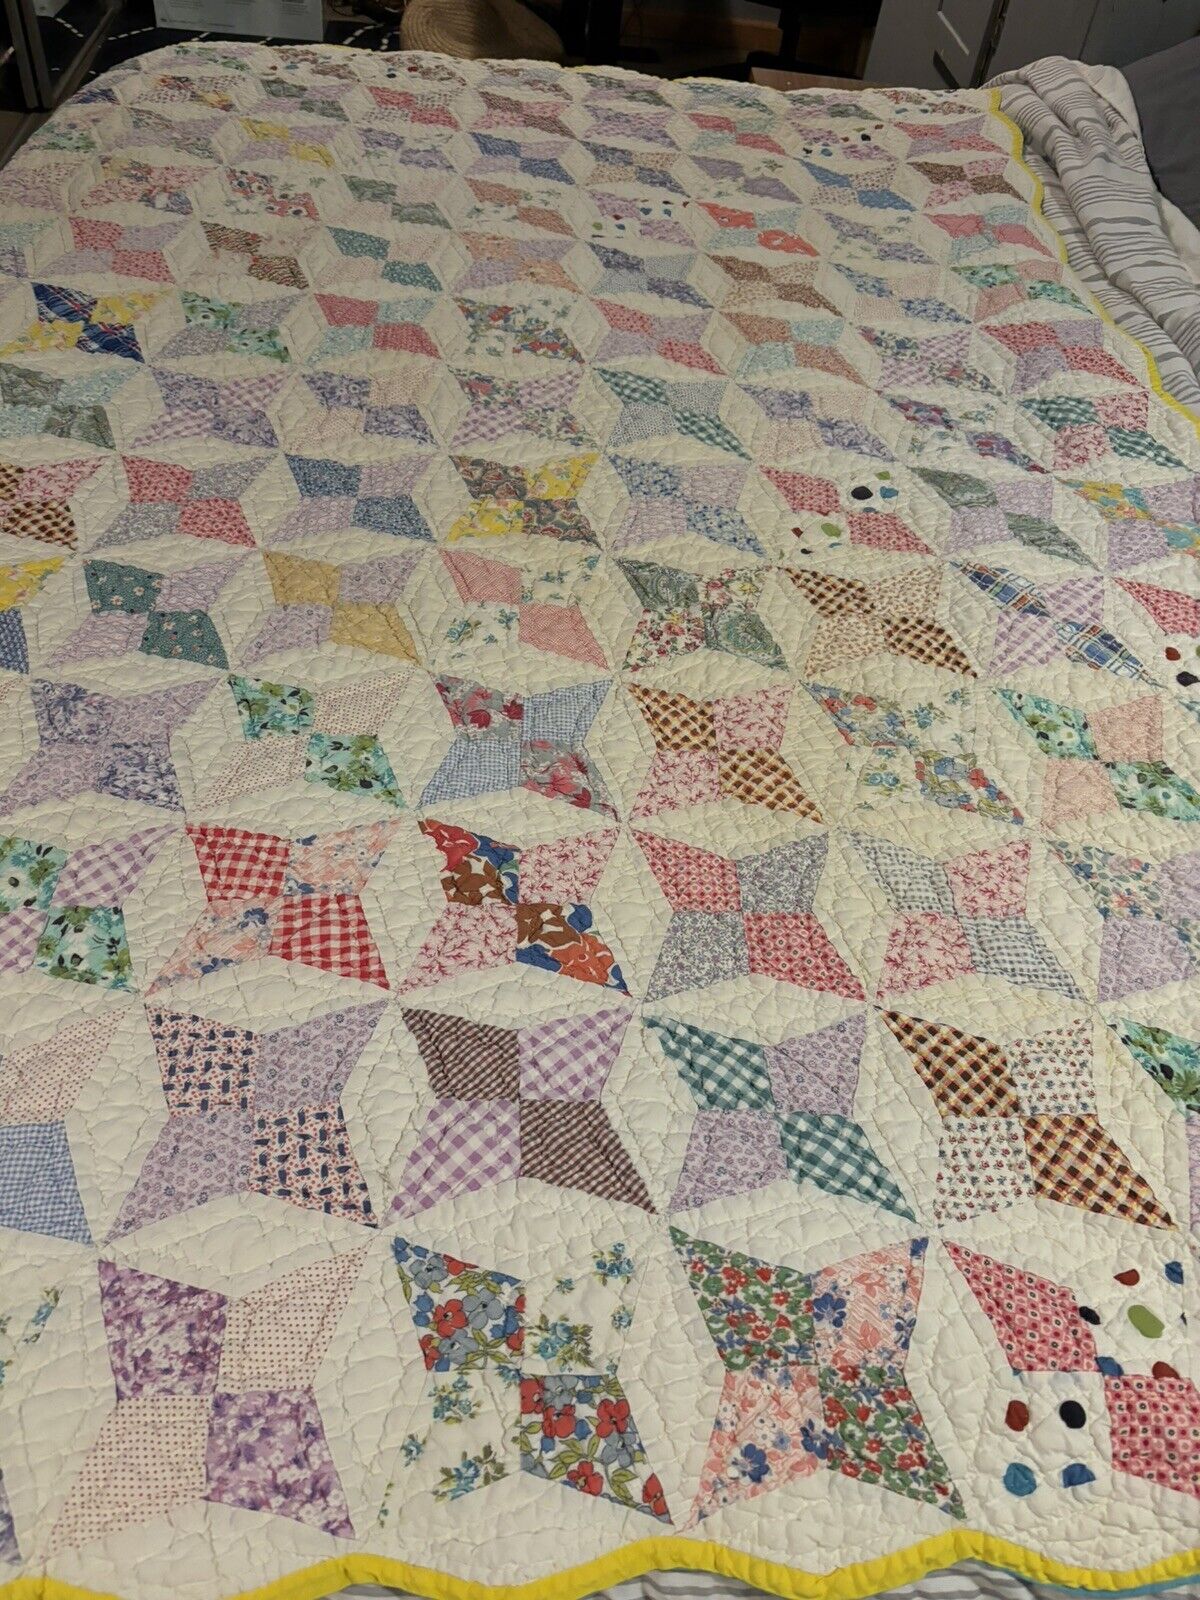 Amazing Vintage Handsewn Four Point Star Quilt - Feed Sacks - 76”x65”